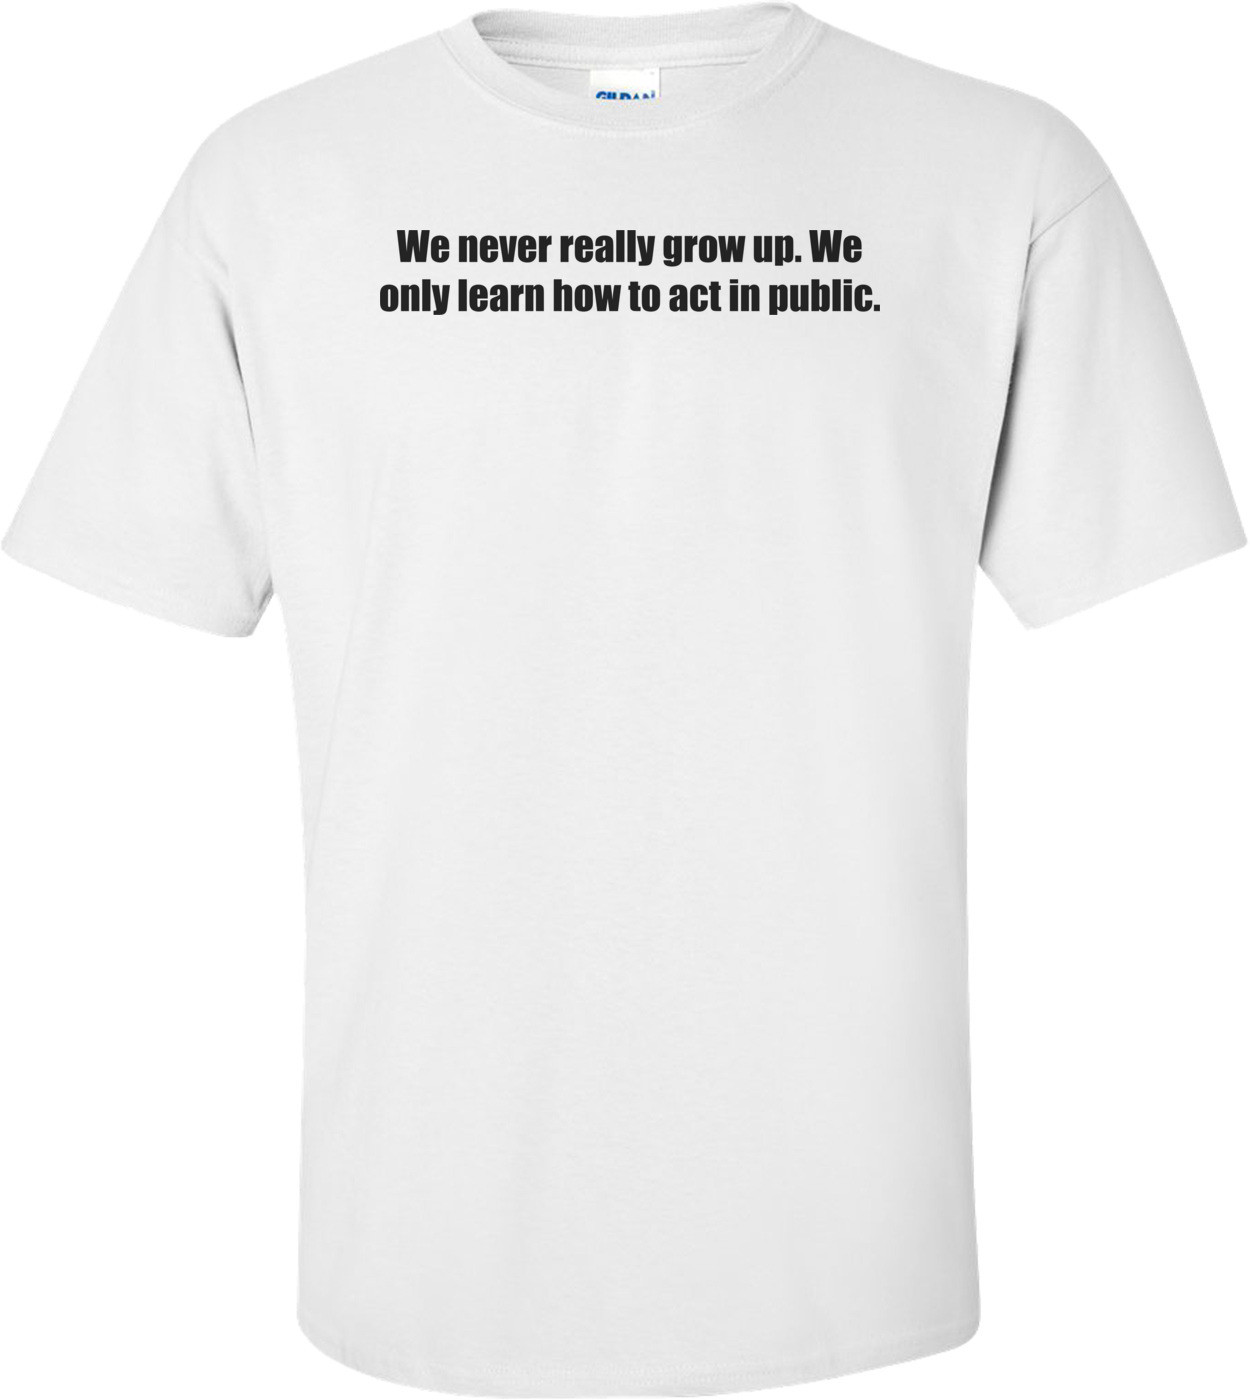 We never really grow up. We only learn how to act in public. Shirt